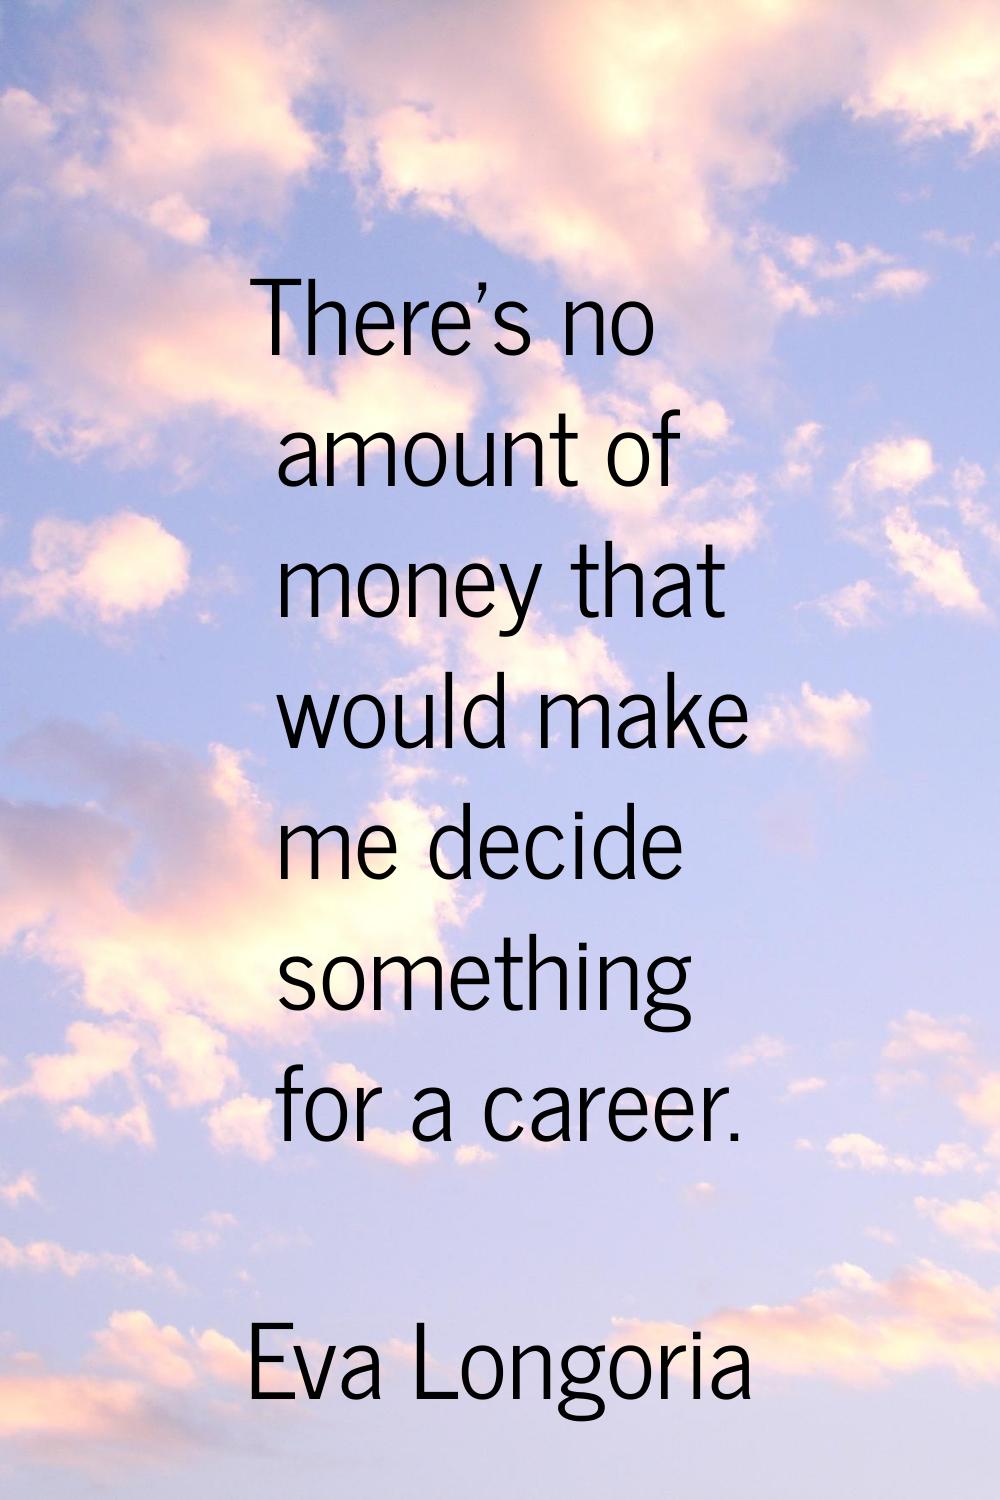 There's no amount of money that would make me decide something for a career.